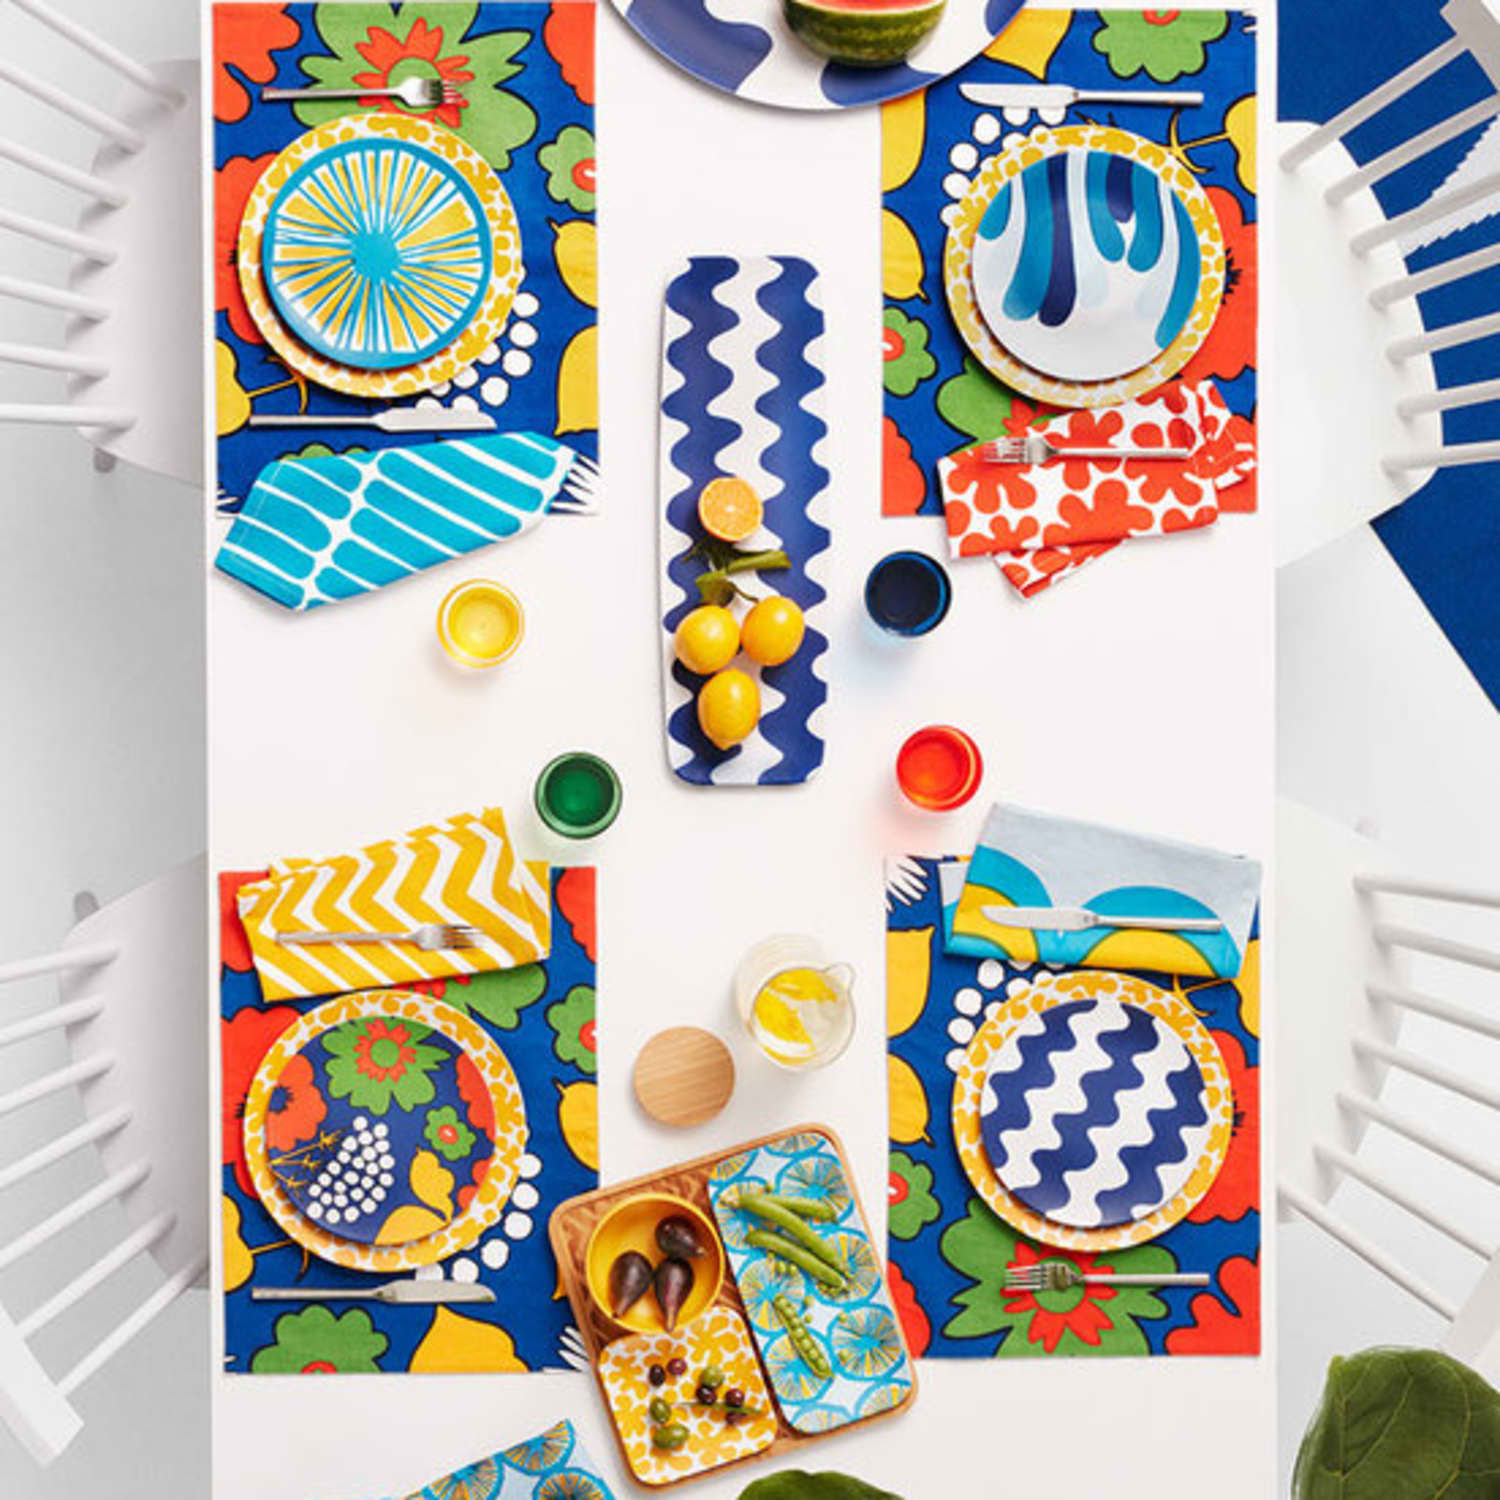 Our Favorite Kitchen Finds from the New Marimekko for Target Collaboration  | Kitchn